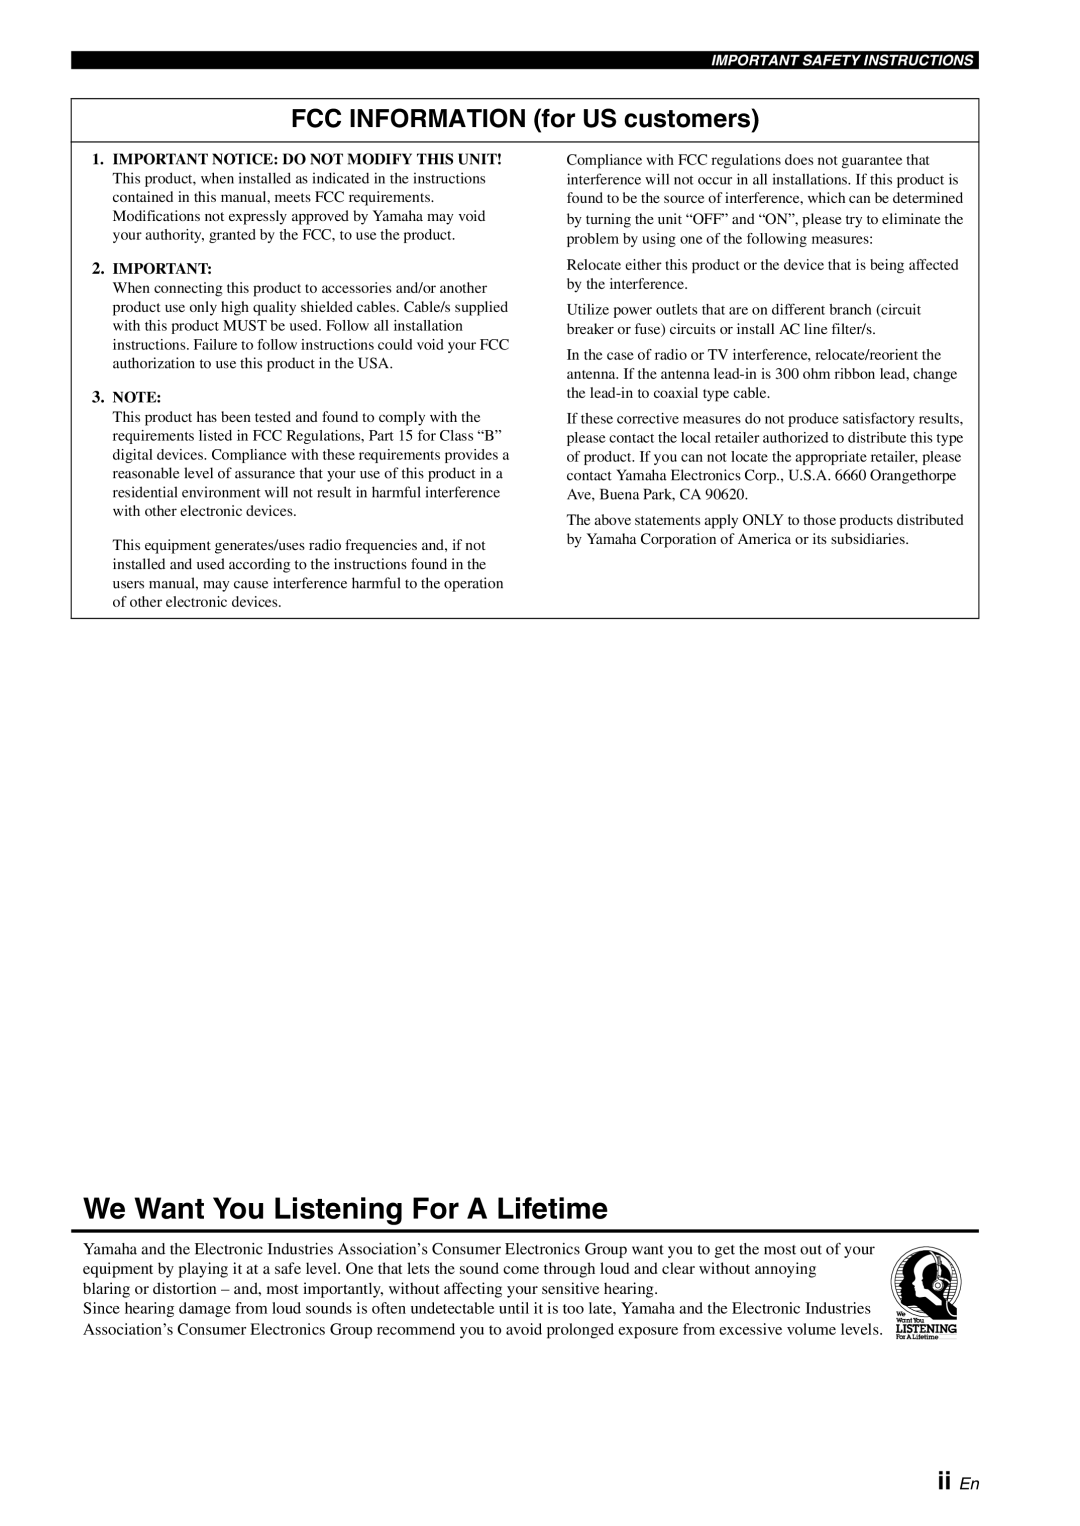 Yamaha YSP-3050 owner manual We Want You Listening For A Lifetime, FCC INFORMATION for US customers, ii En 